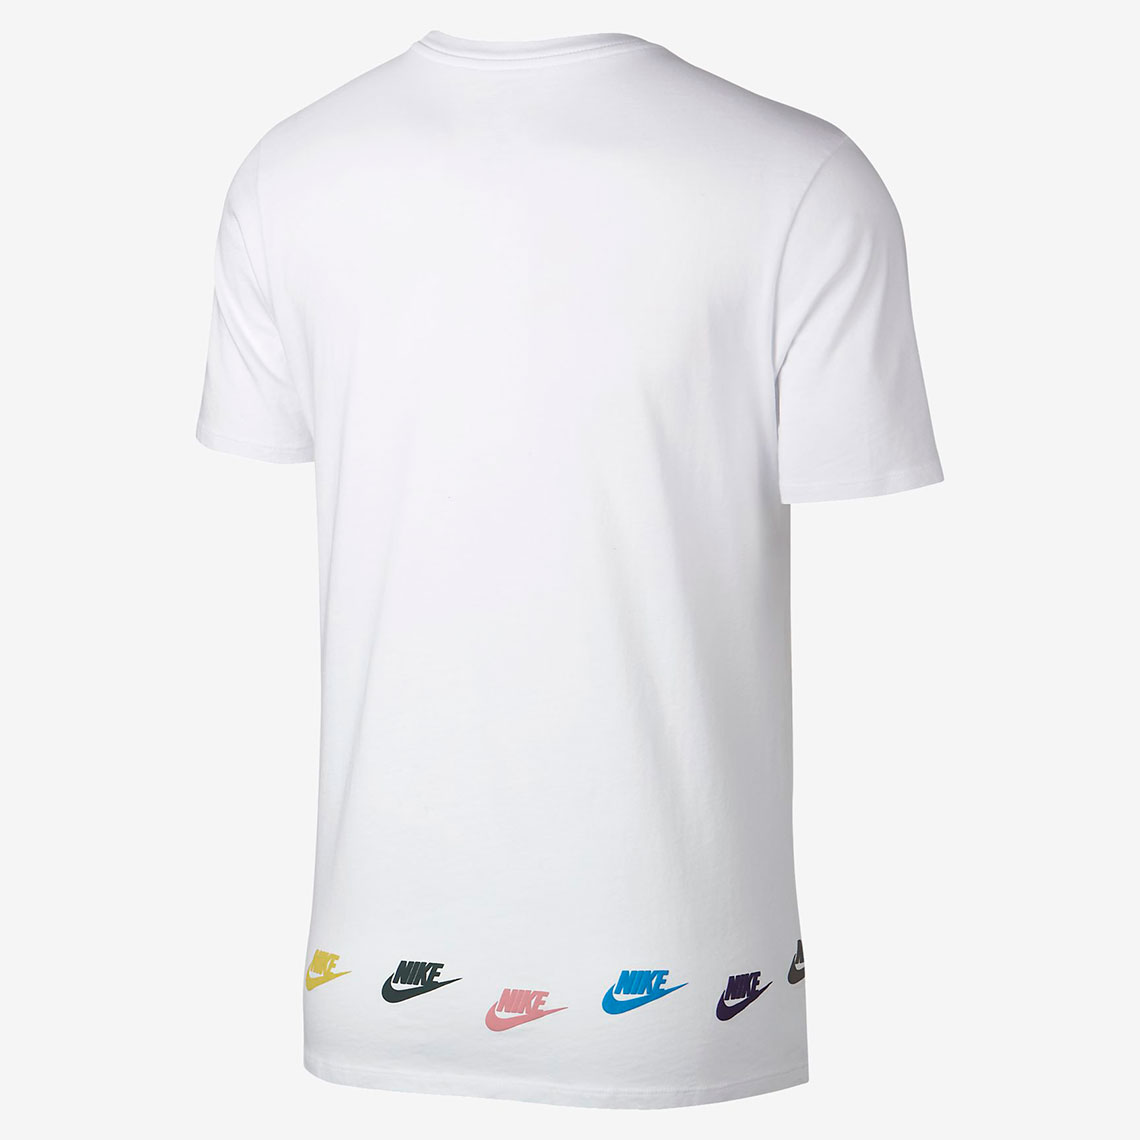 shirts to match sean wotherspoon air max